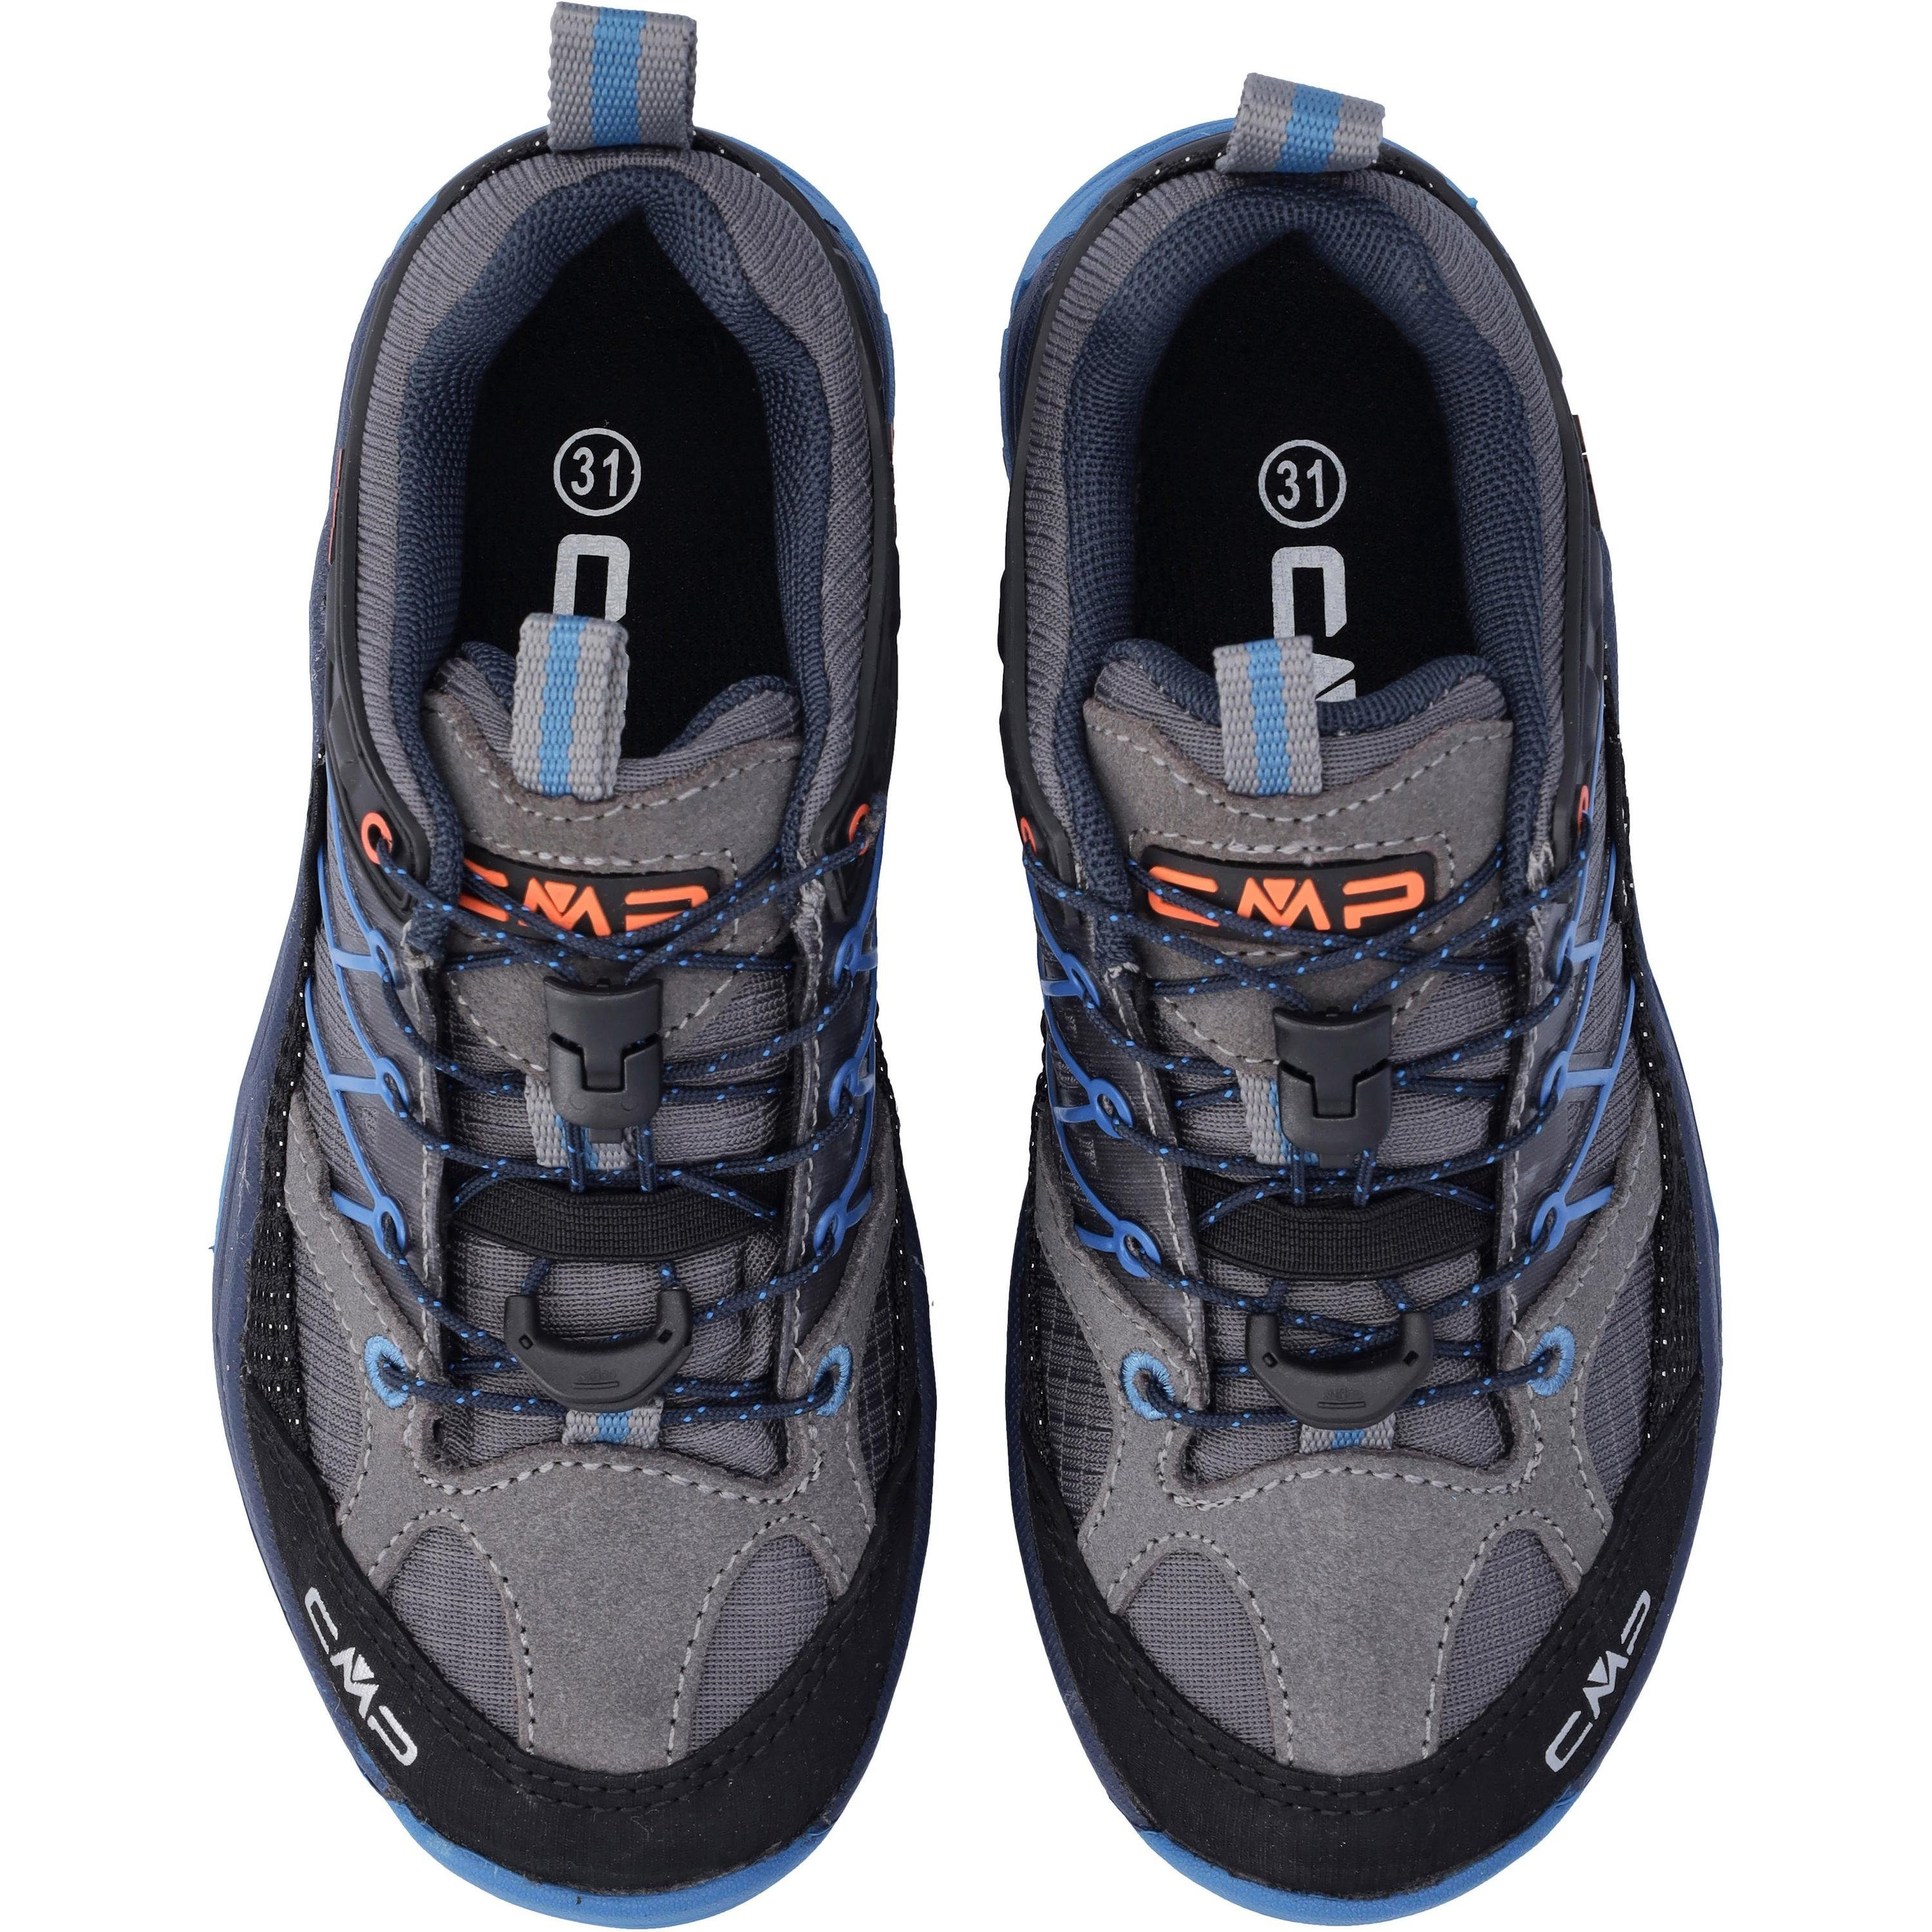 CMP Rigel Outdoorschuh WP Low graffite-oltremare